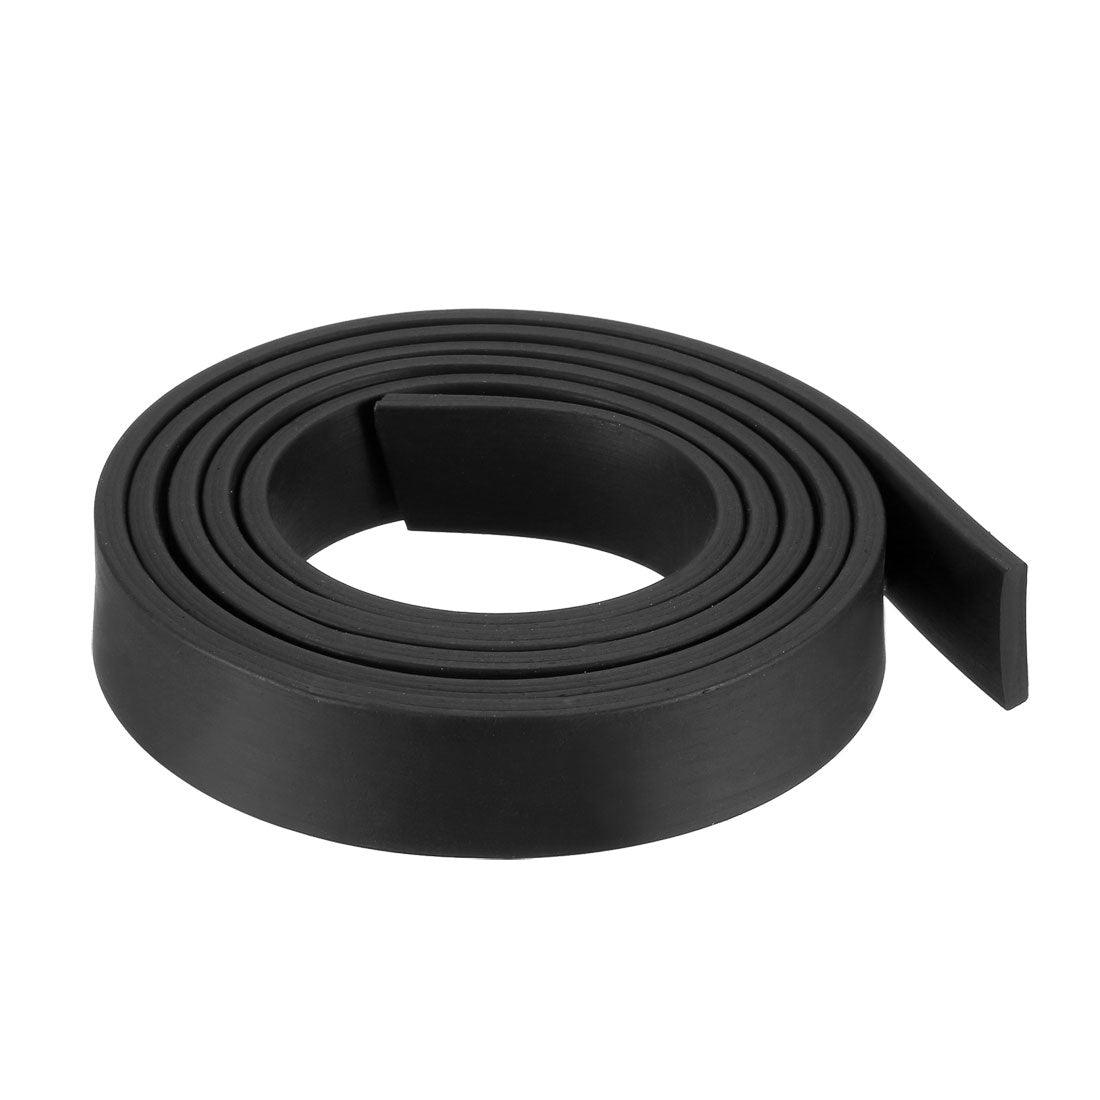 uxcell Uxcell Solid Rectangle Rubber Seal Strip 15mm Wide 3mm Thick, 1 Meter Long Black